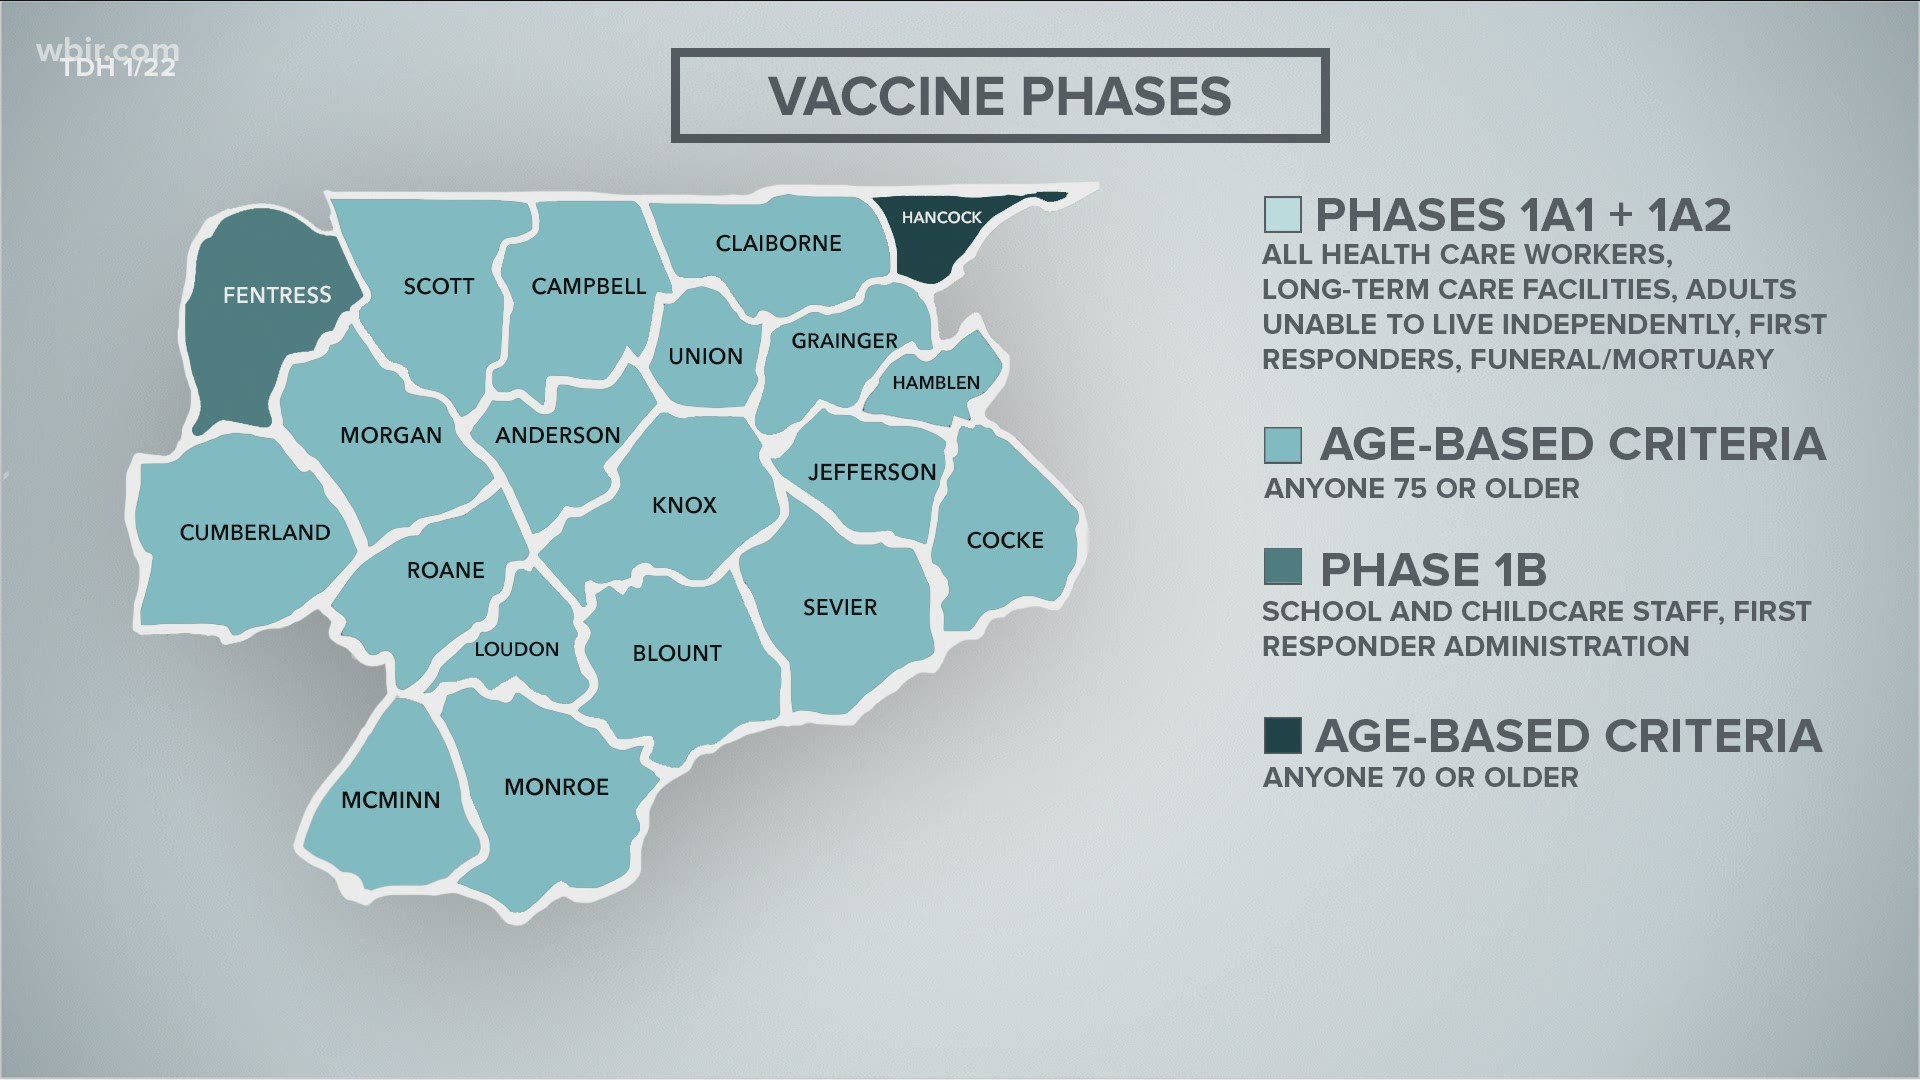 People 70 years old and older are now eligible to get the COVID-19 vaccine in Hancock County.